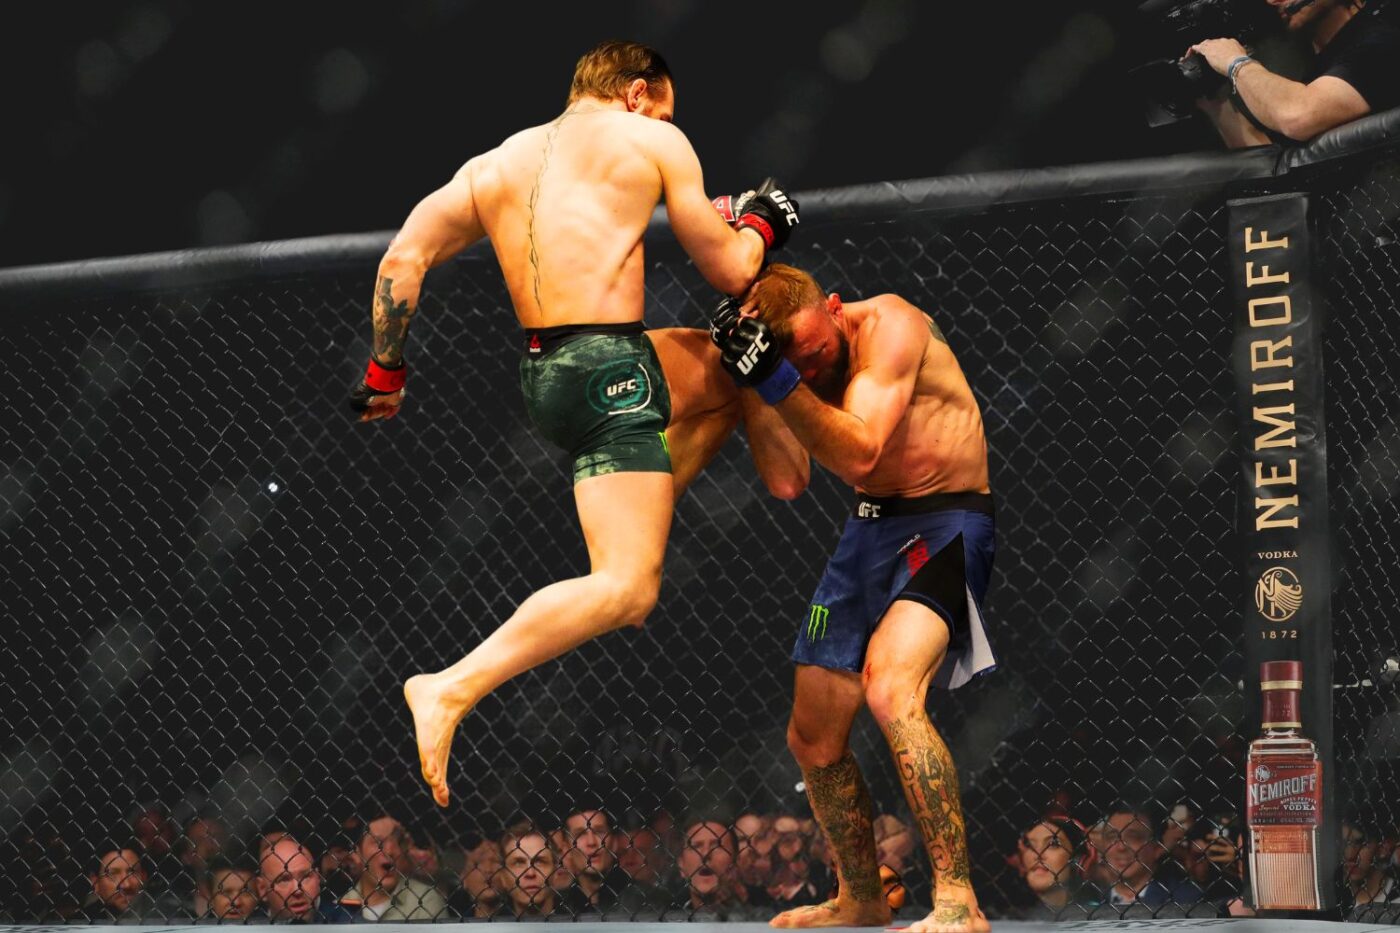 How Conor McGregor Took Out Donald Cerrone In Just 40 Seconds - DMARGESport